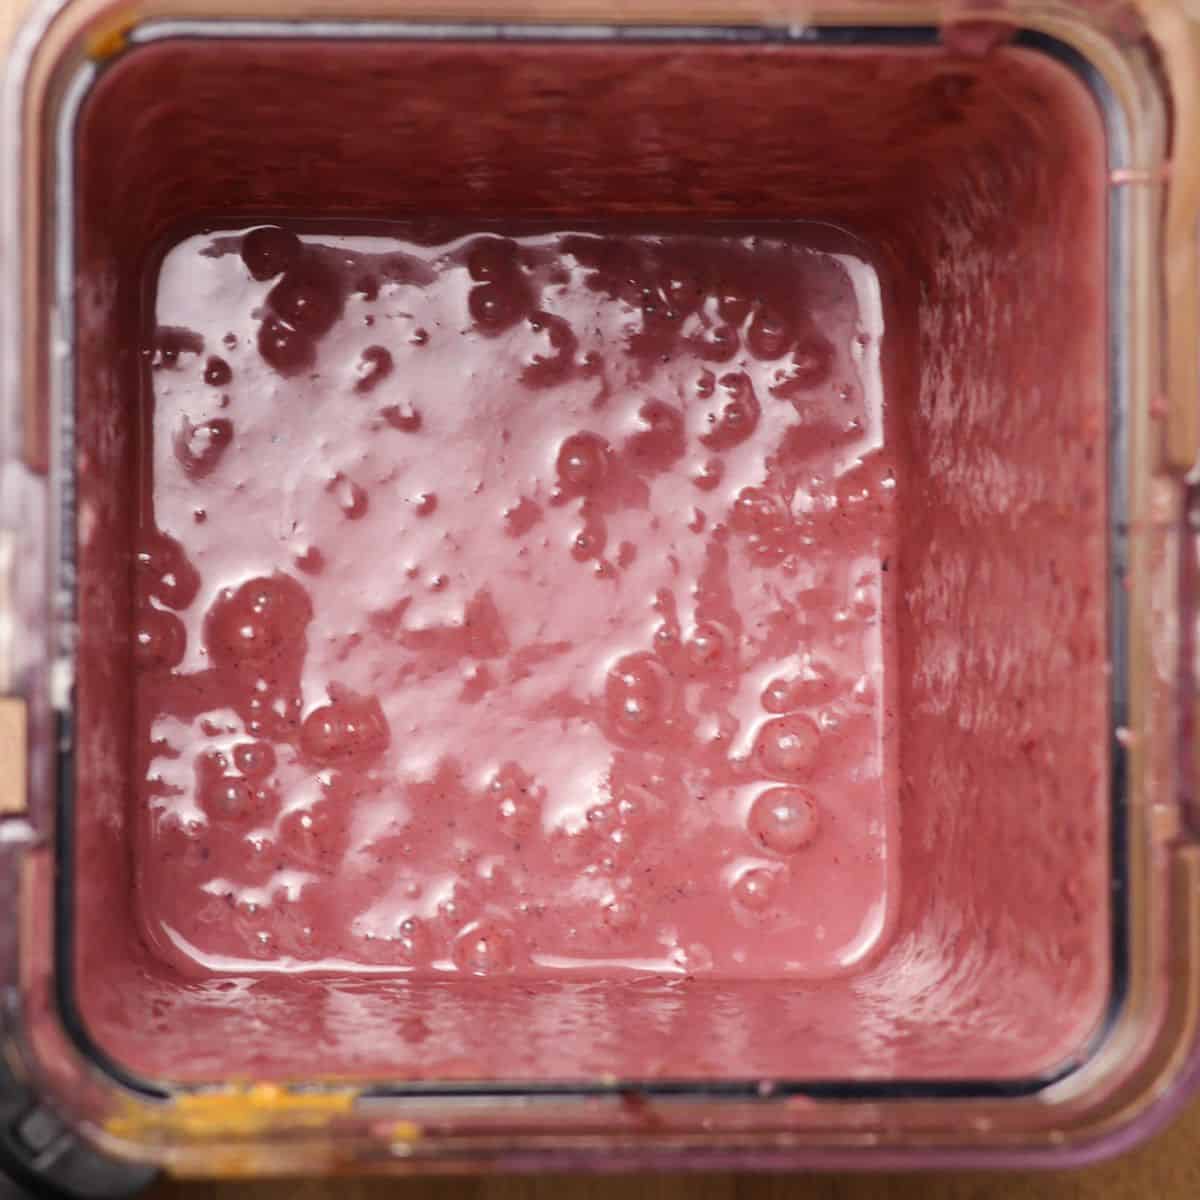 Top view of a blender containing a freshly blended acai mixture, showing a creamy purple texture with air bubbles on the surface.